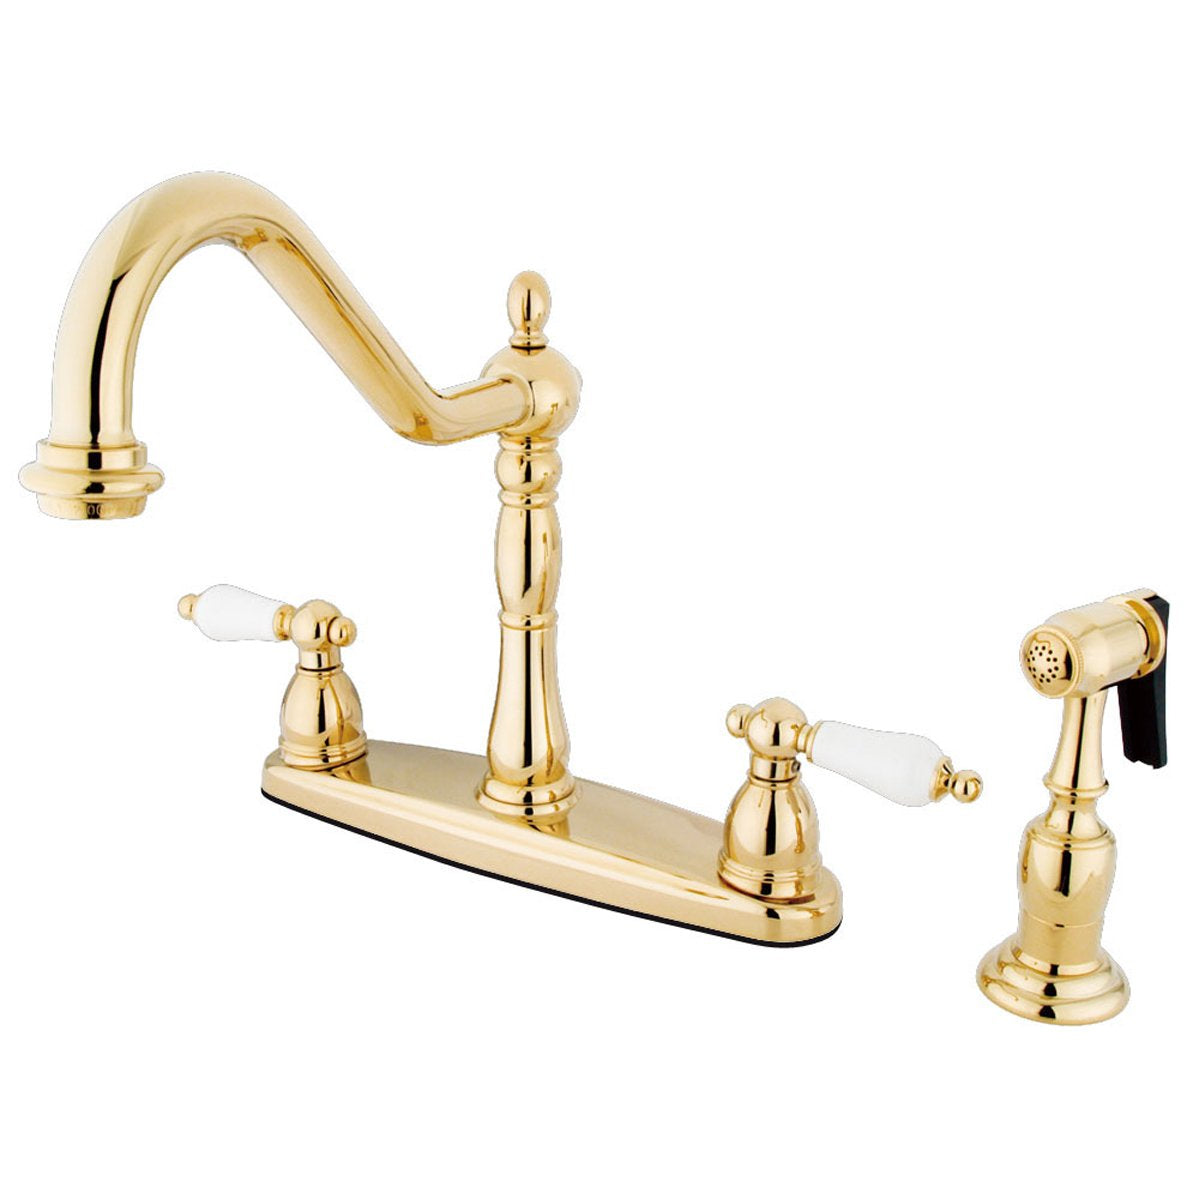 Kingston Brass Heritage 8" Center Kitchen Faucet with Brass Sprayer and Porcelain Lever Handle-Kitchen Faucets-Free Shipping-Directsinks.